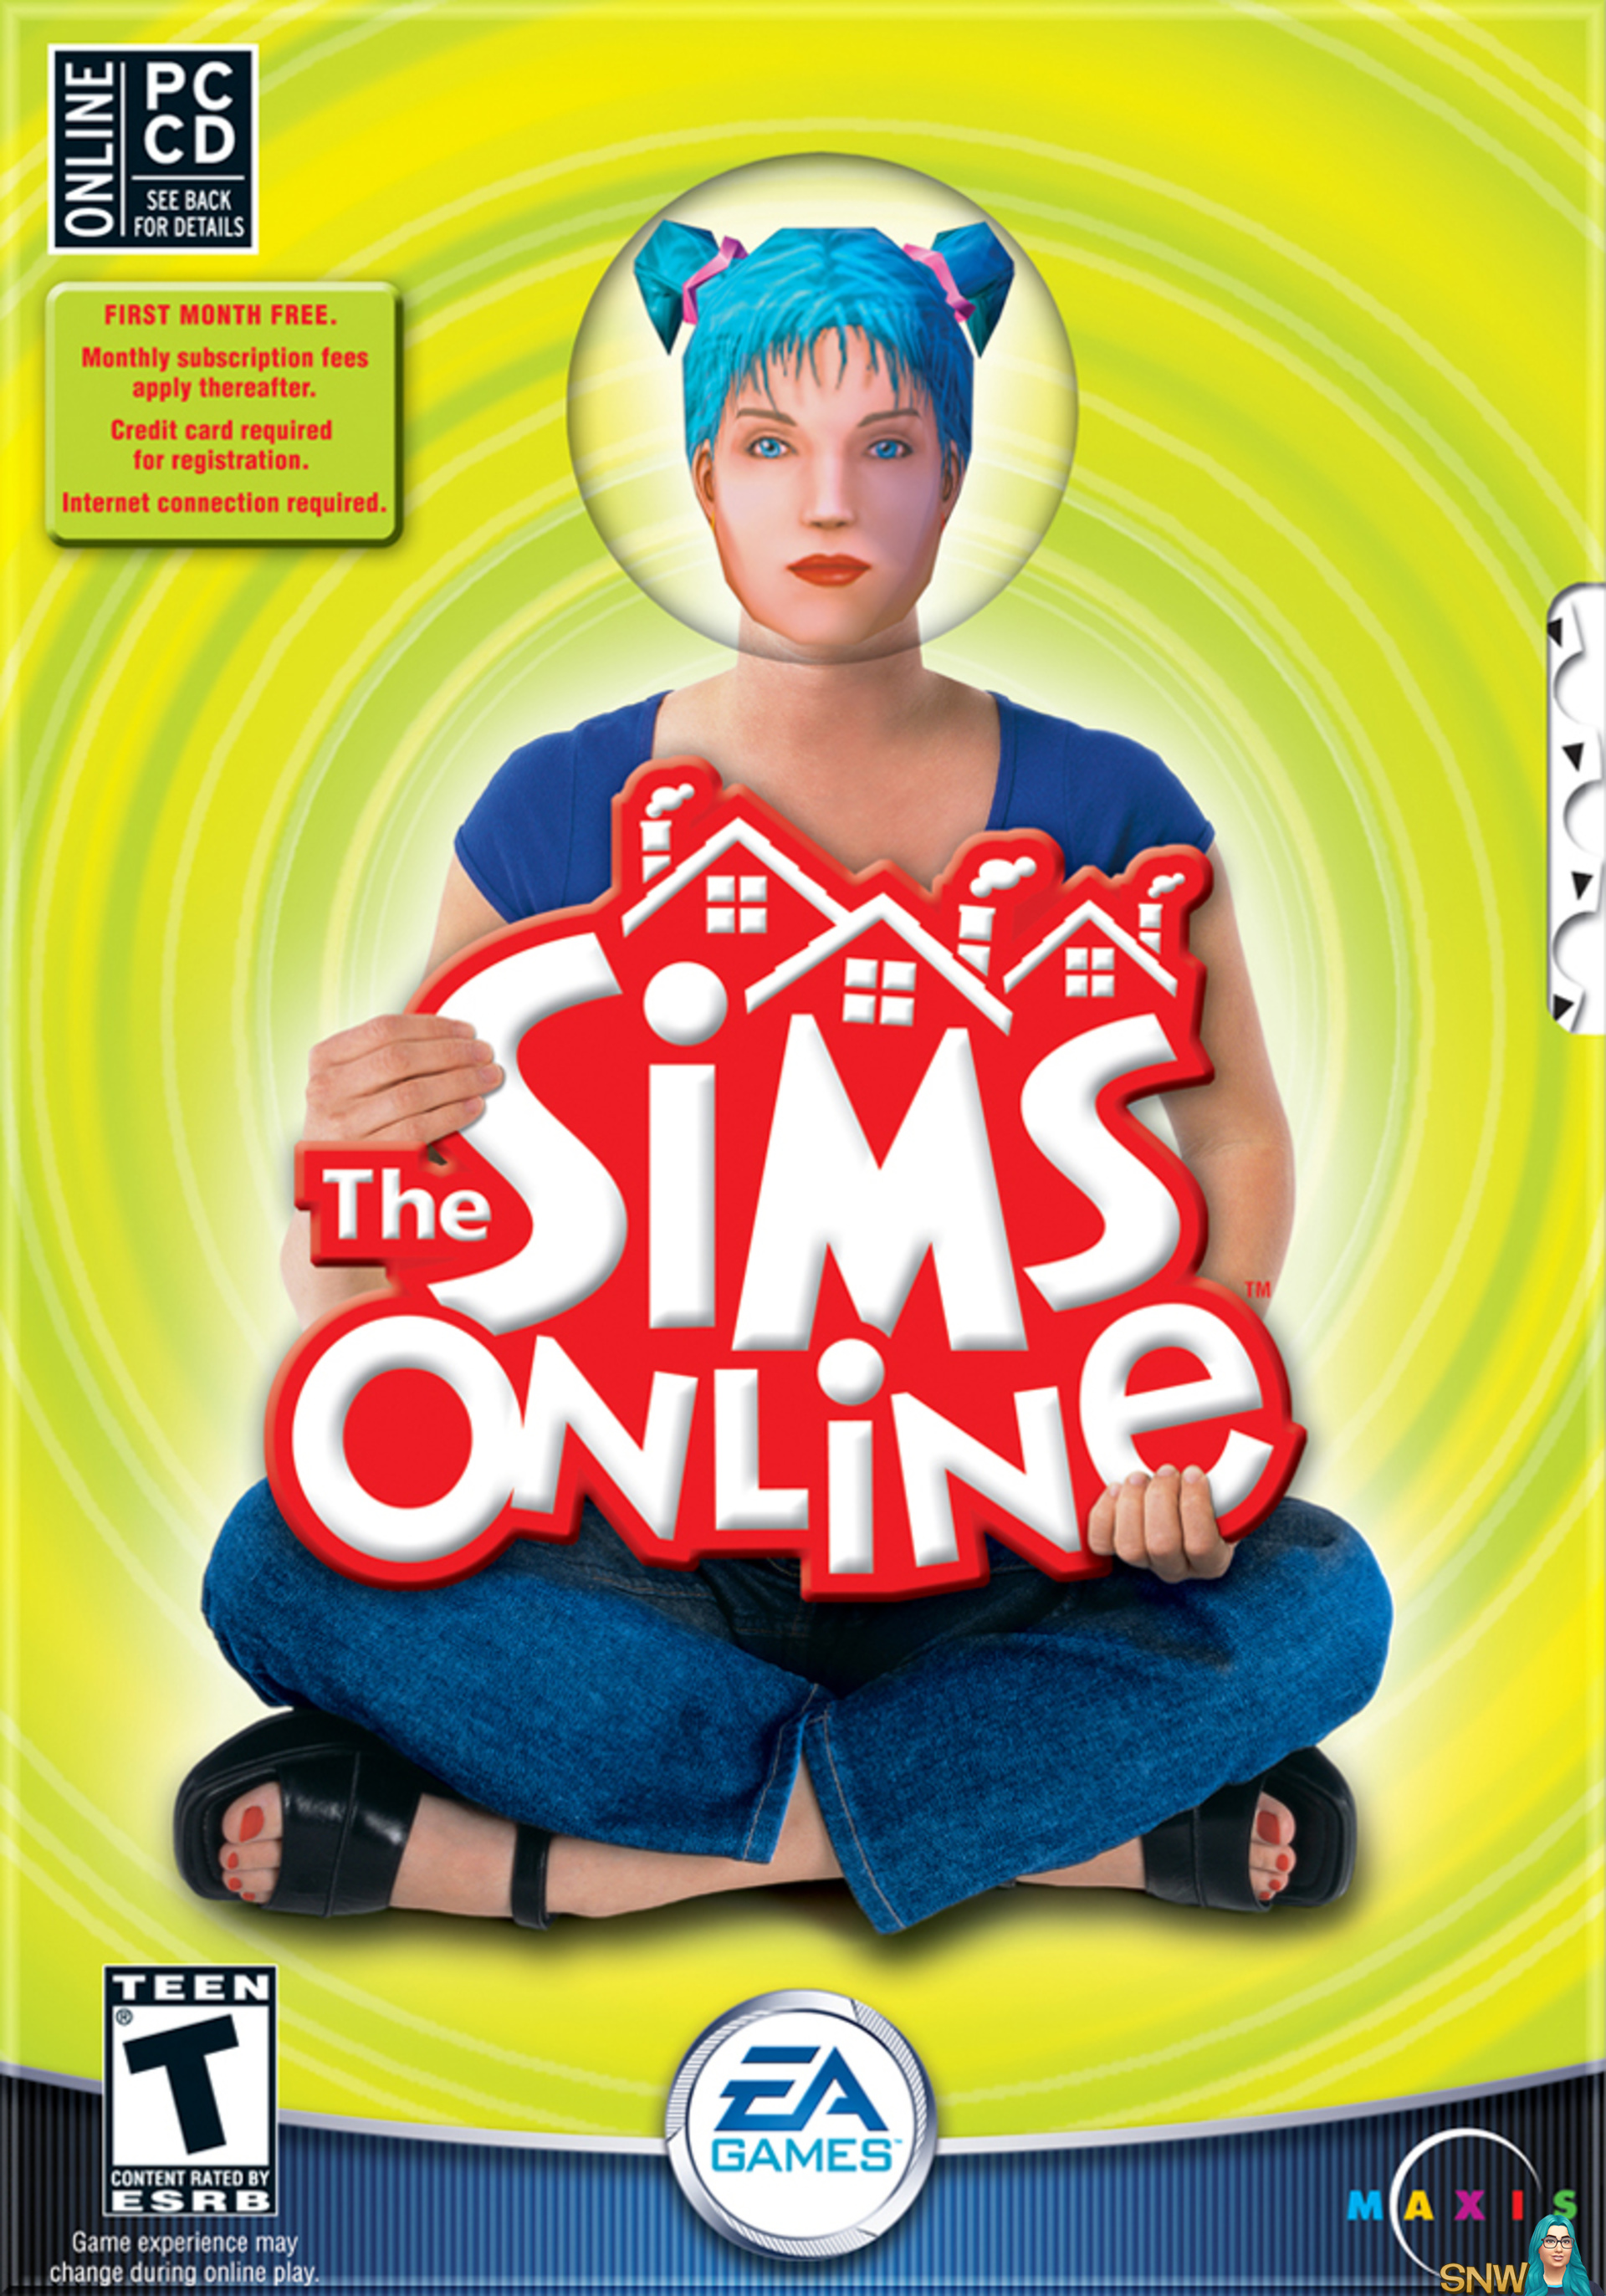 Sims free play online game